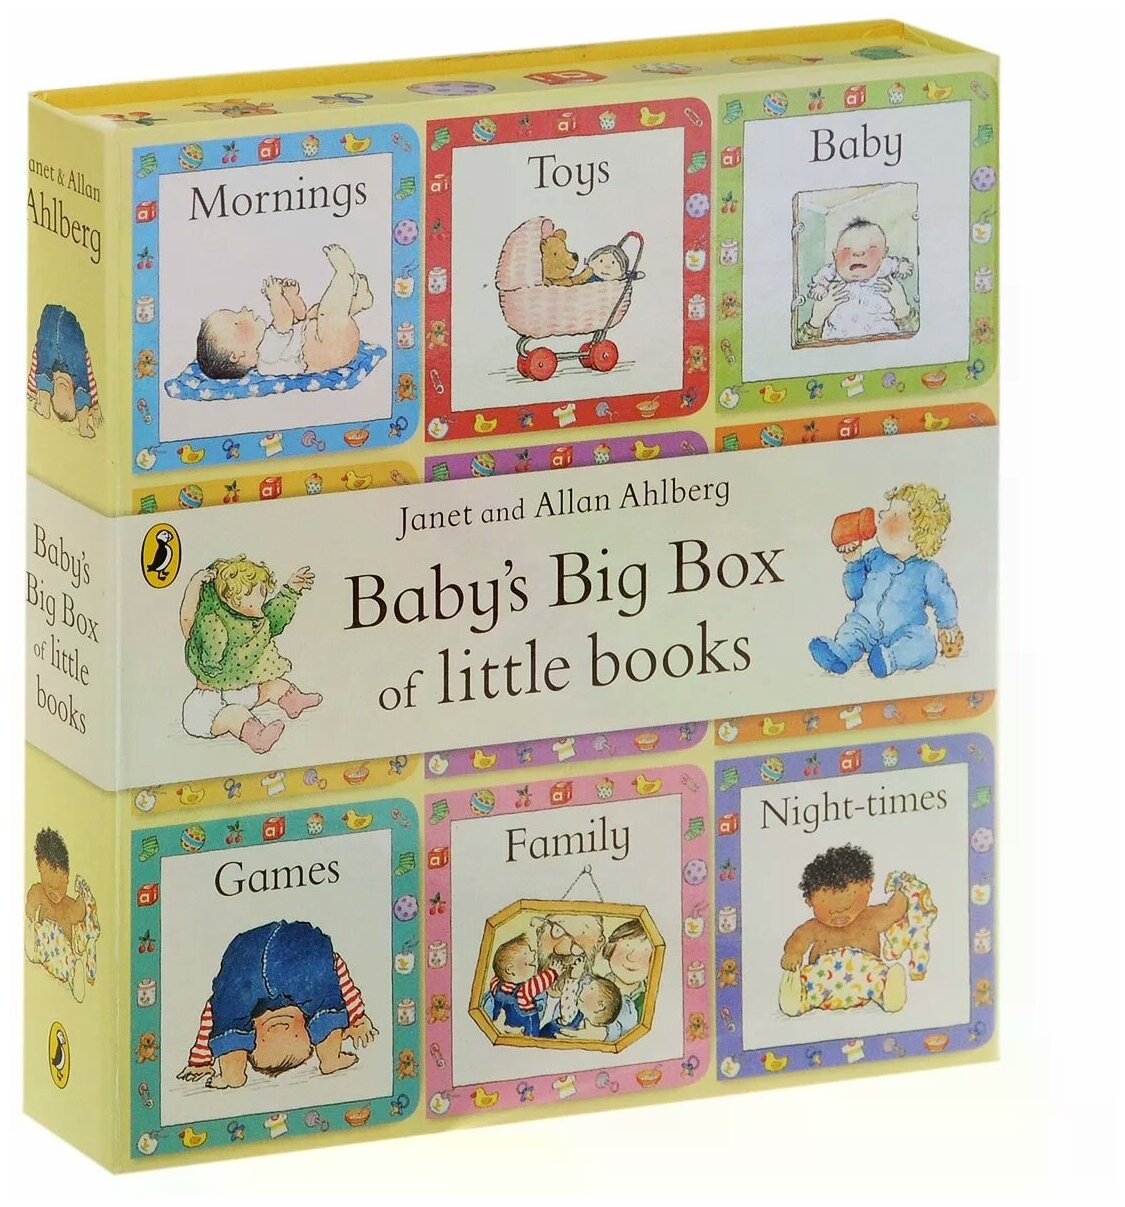 Ahlberg Janet "Baby's Big Box of little Books"